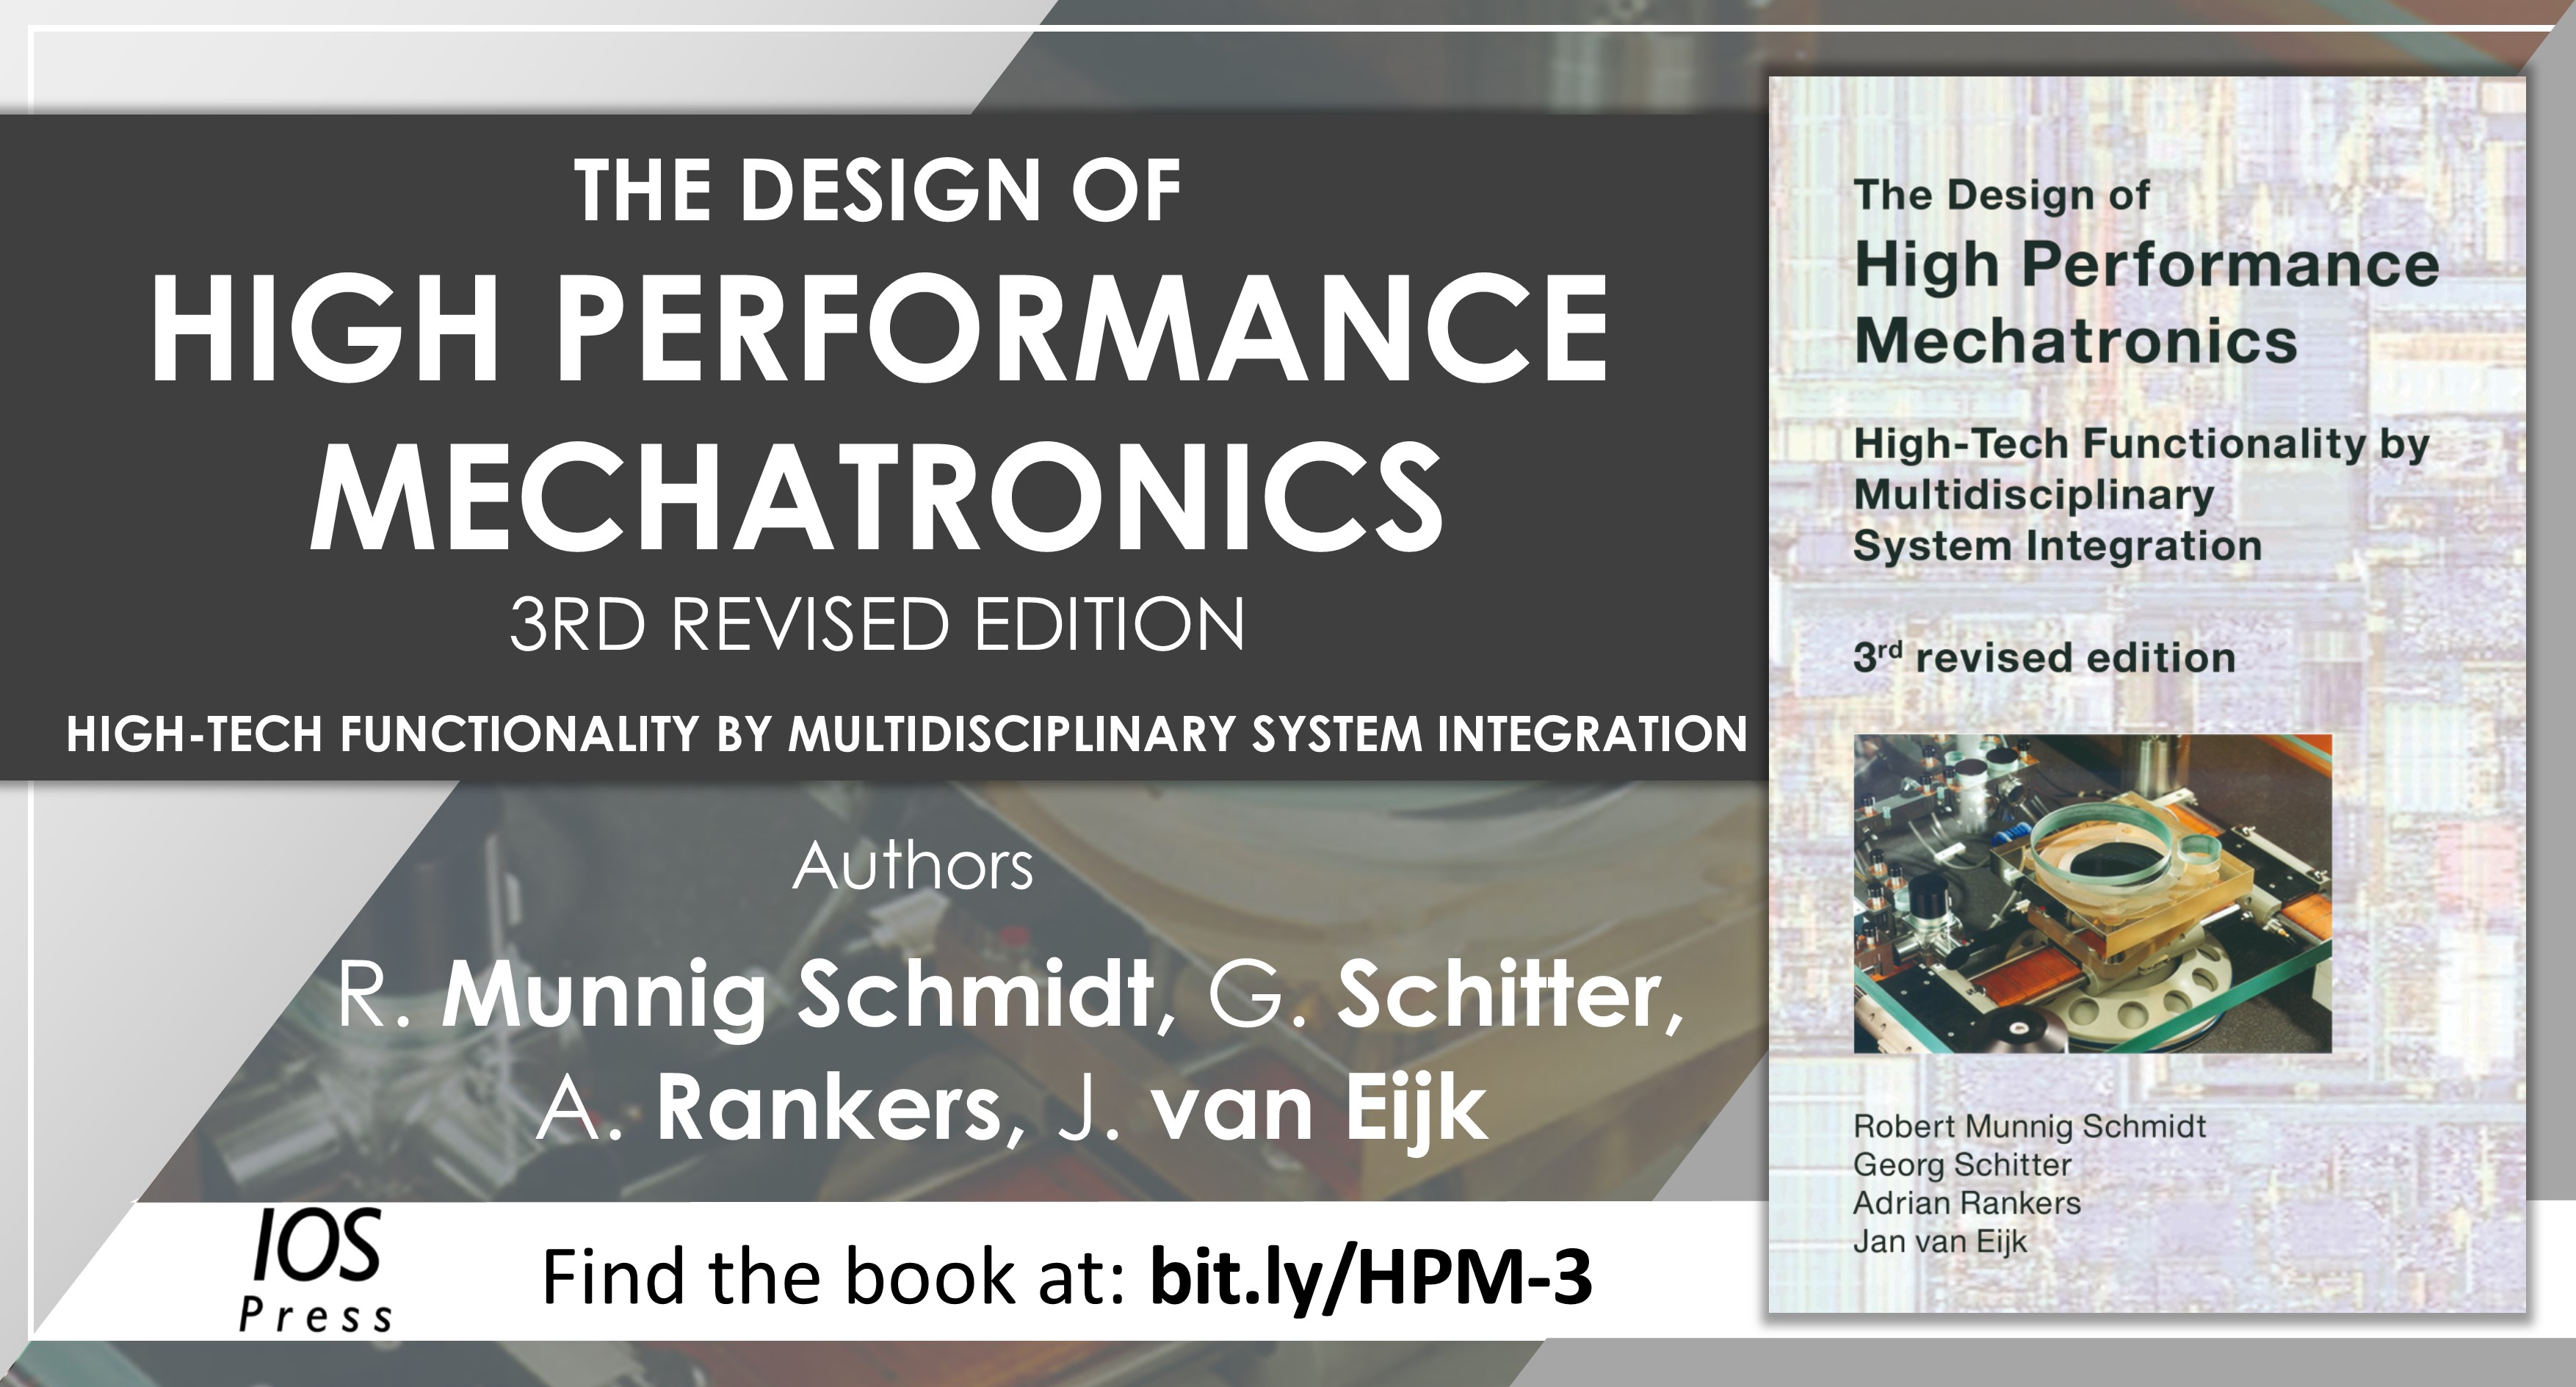 3rd revised edition of the book 'The Design of High Performance Mechatronics'